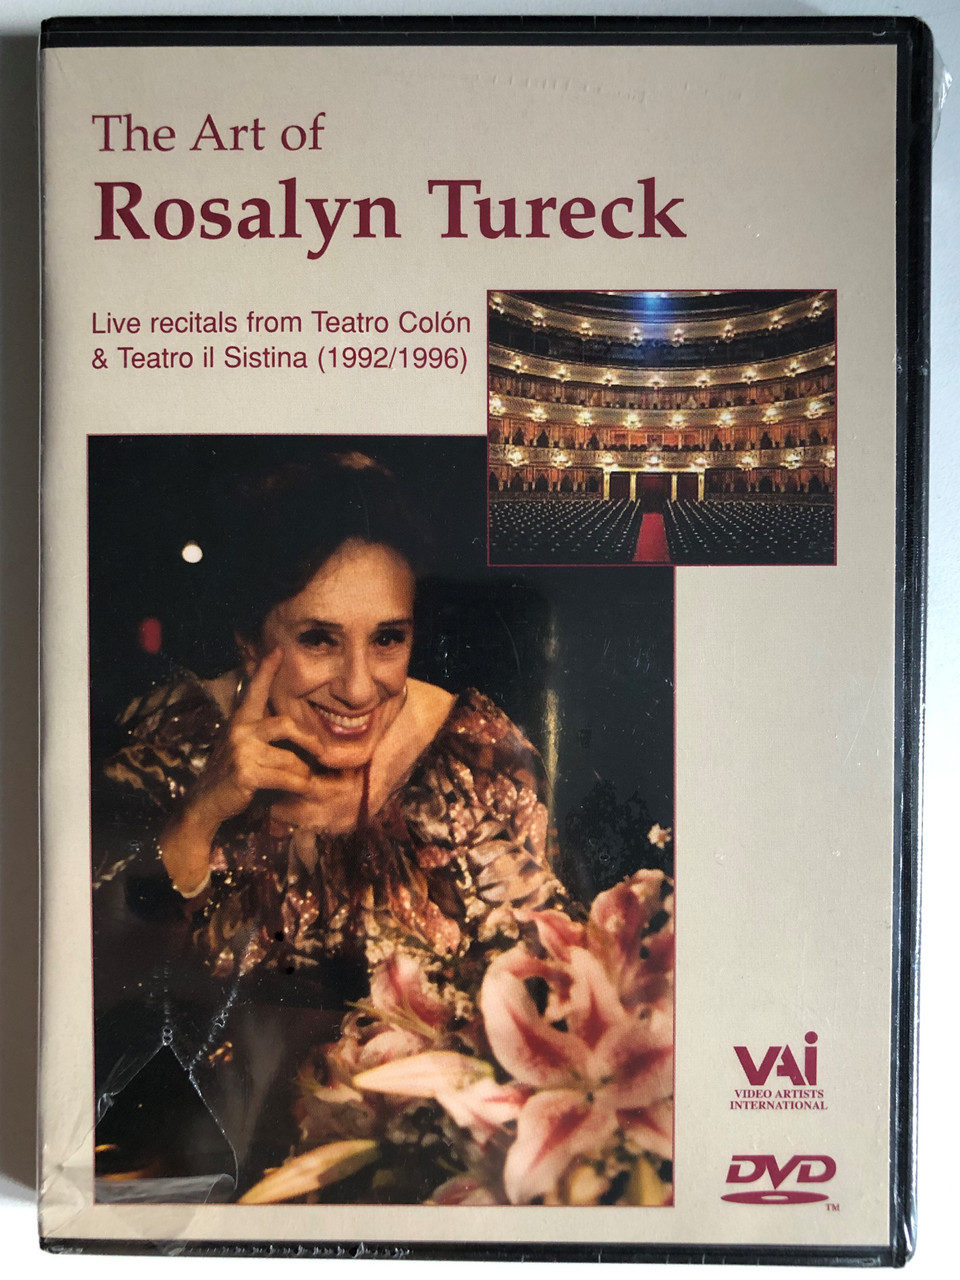 The_Art_of_Rosalyn_Tureck_Live_Recitals_from_Teatro_Colon_Teatro_il_Sistina_Rosalyn_Tureck_piano_Packaging_and_Design_2003_Video_Artists_International_Inc._DVD_2__43328.1691726380.1280.1280.JPG (960×1280)